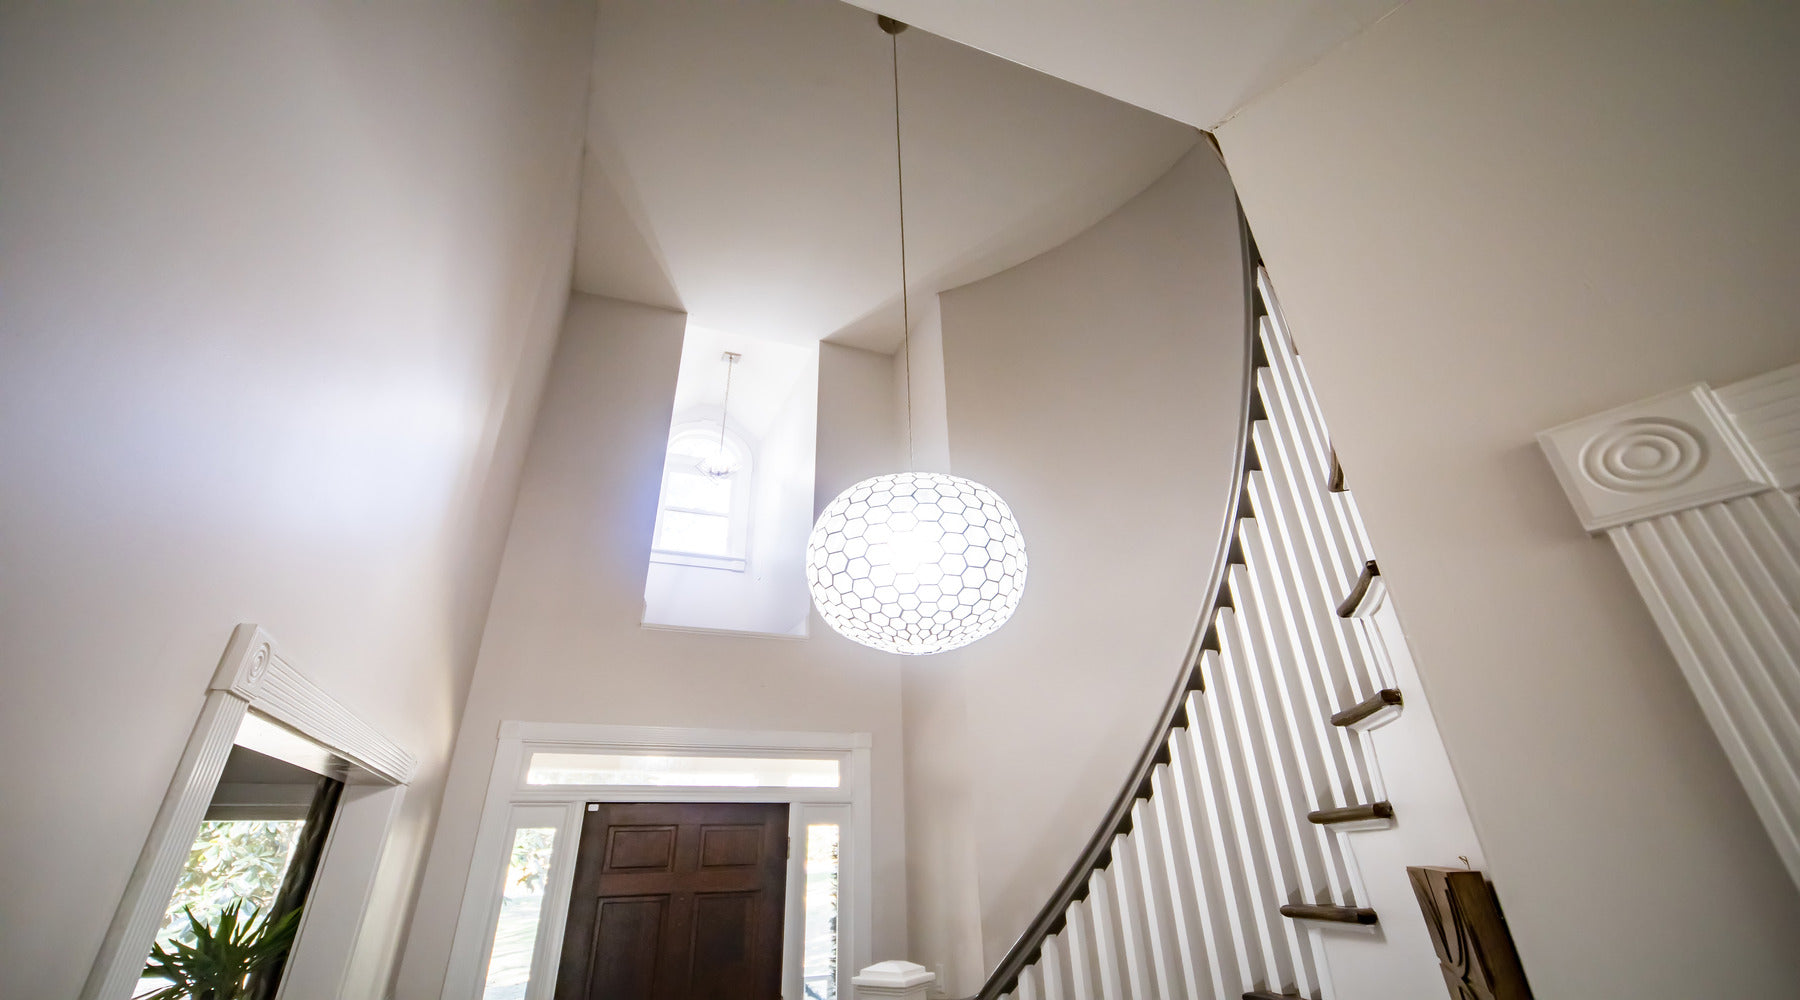 A19 LED bulb used in pendant light hanging in entrance of newly renovated house